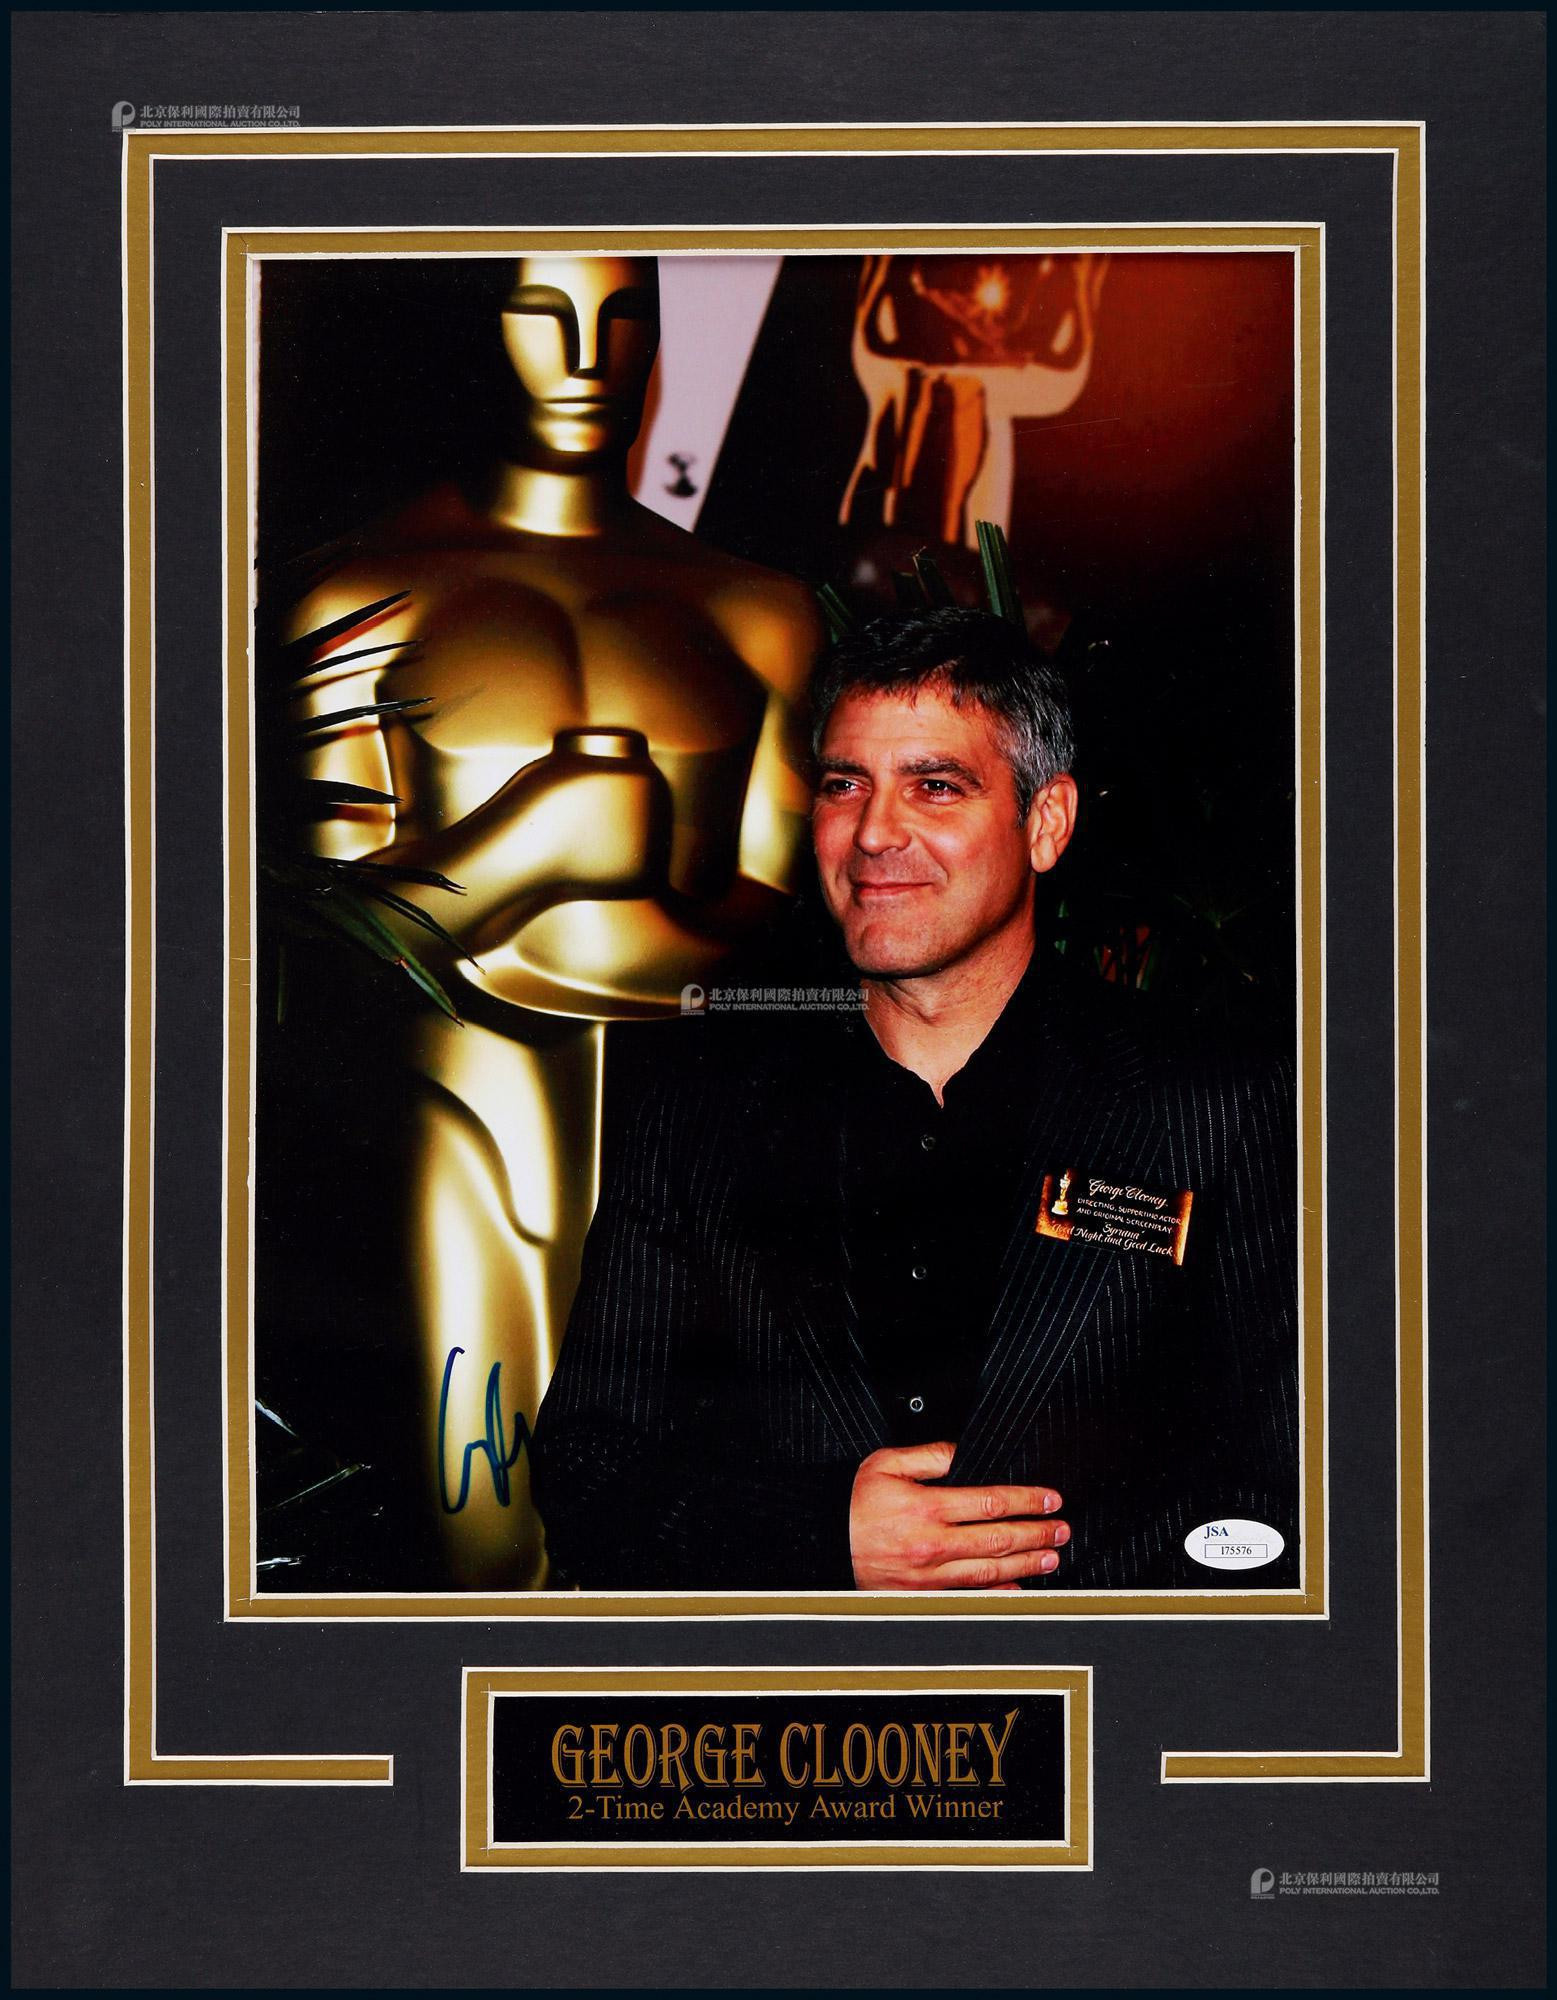 The autographed photo of George Clooney, the “Legendary American movie king” , with certificate